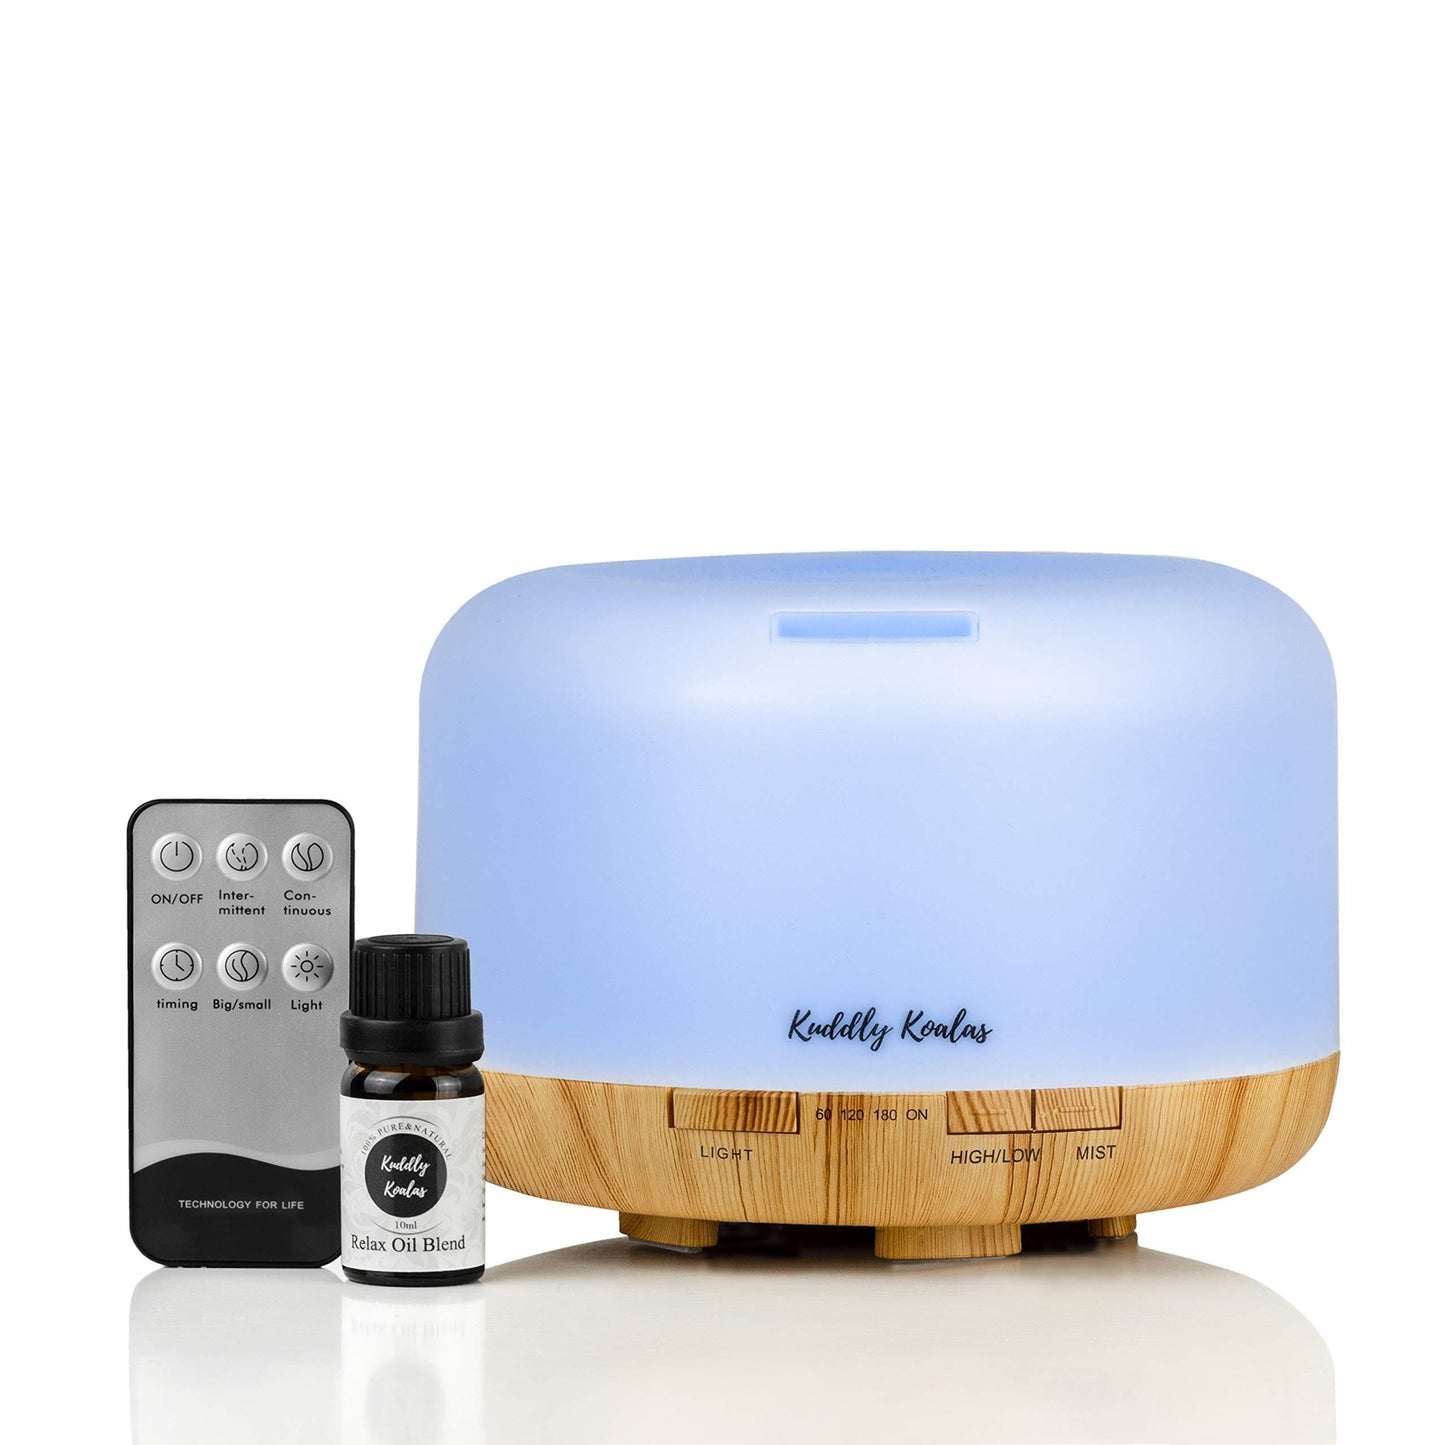 KUDDLY KOALAS 500 ml Remote Control Essential Oil Diffuser - with 10ml 100% Pure ‘Relax’ Essential Oil Blend | For Better Sleep Relaxation and Stress Relief | with AU Power Plug | Super Quiet Ultrasonic Aromatherapy| Timer and Safety Auto-off | Scented Ar-Curavita